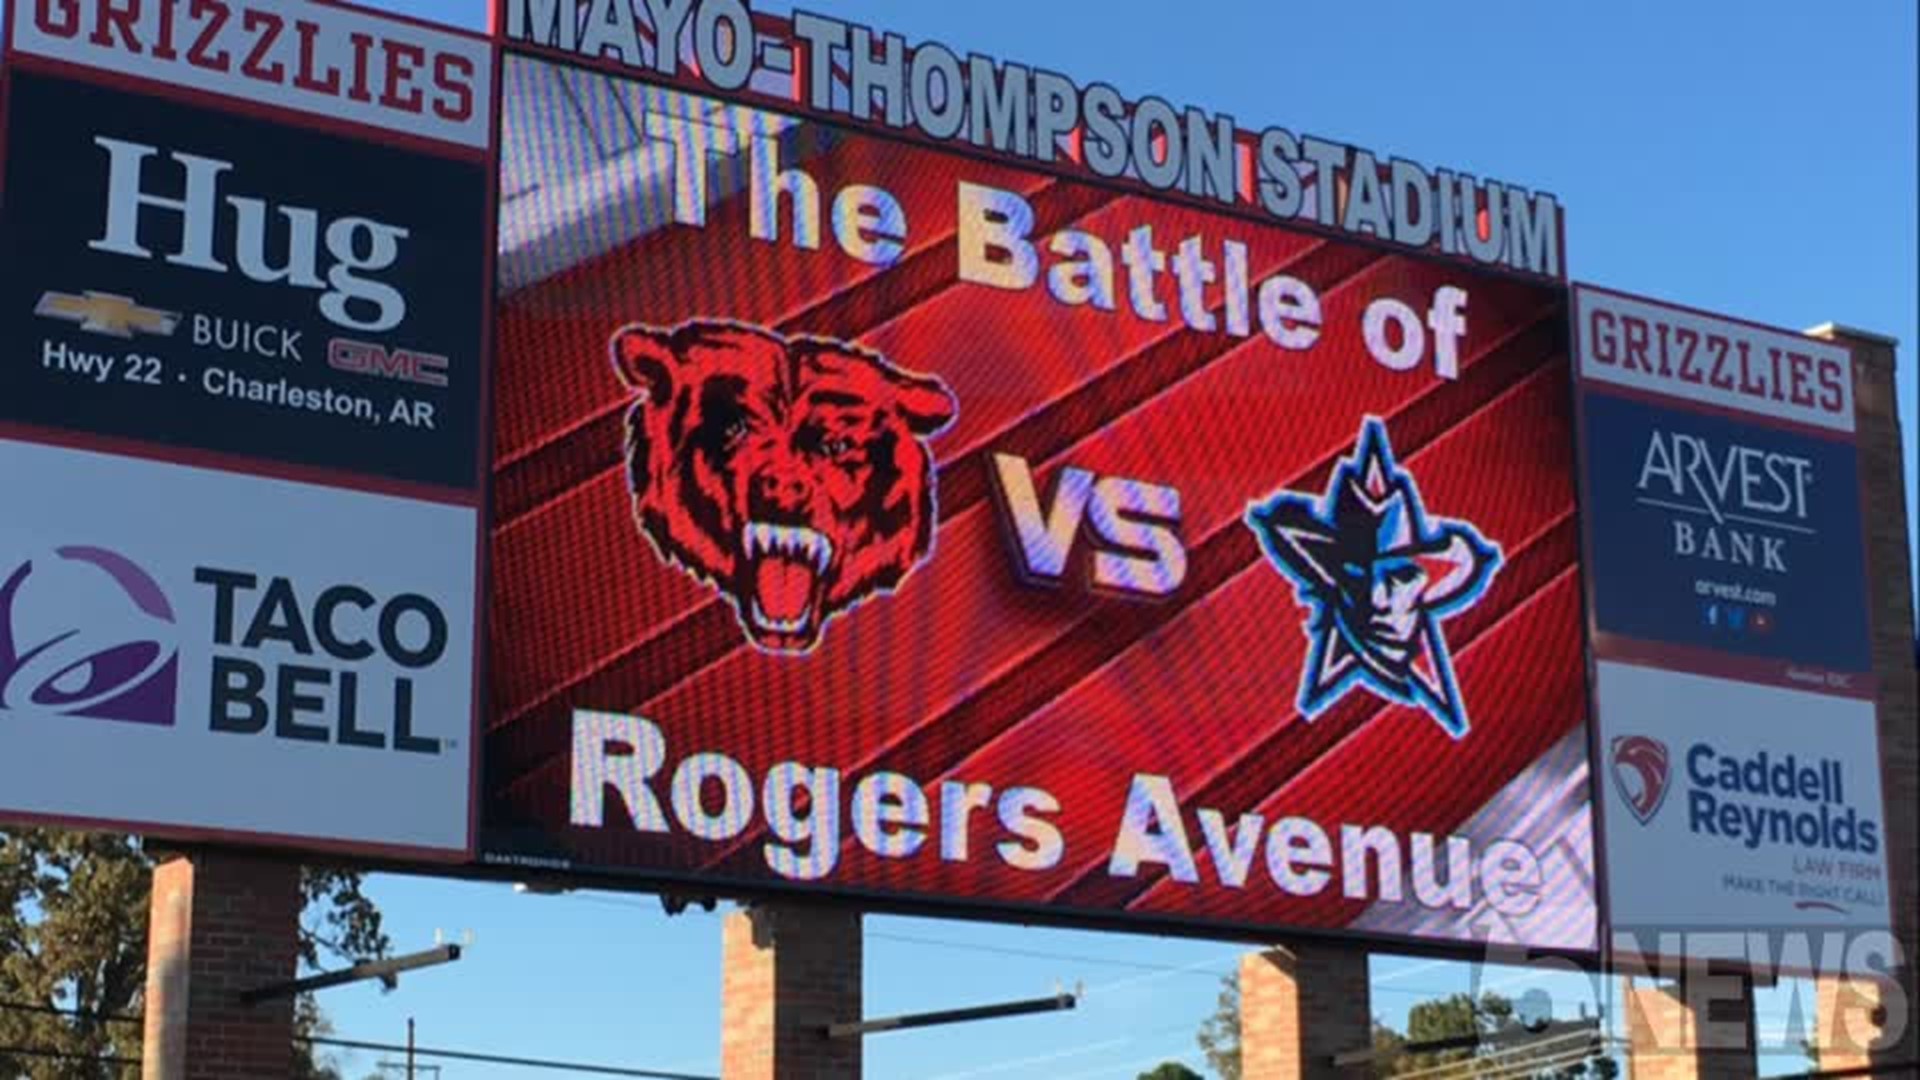 The Battle of Rogers ave is back for a zero week contest between Northside and Southside.